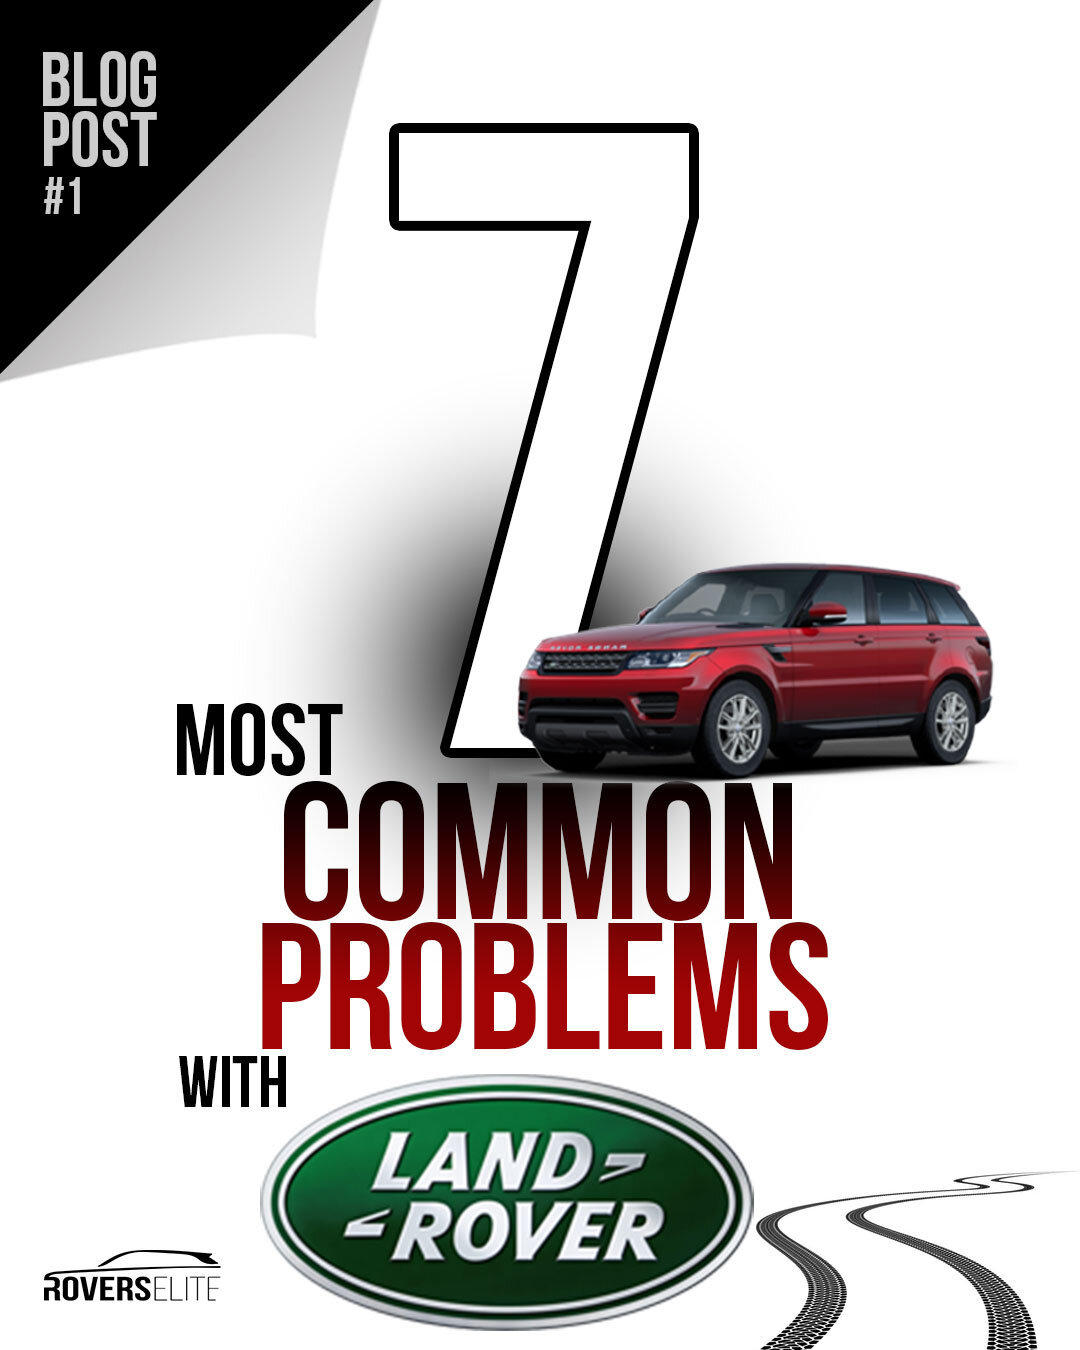 7 Most Common Problems with Land Rover. What to look for and why it happens. Live on our website now under &quot;More&quot; Tab.

Get a quote in minutes at
RoversElite.com
📲 (805) 371-3768
📍62 N Skyline Dr Unit B
Located in #ThousandOaks

Check Eng